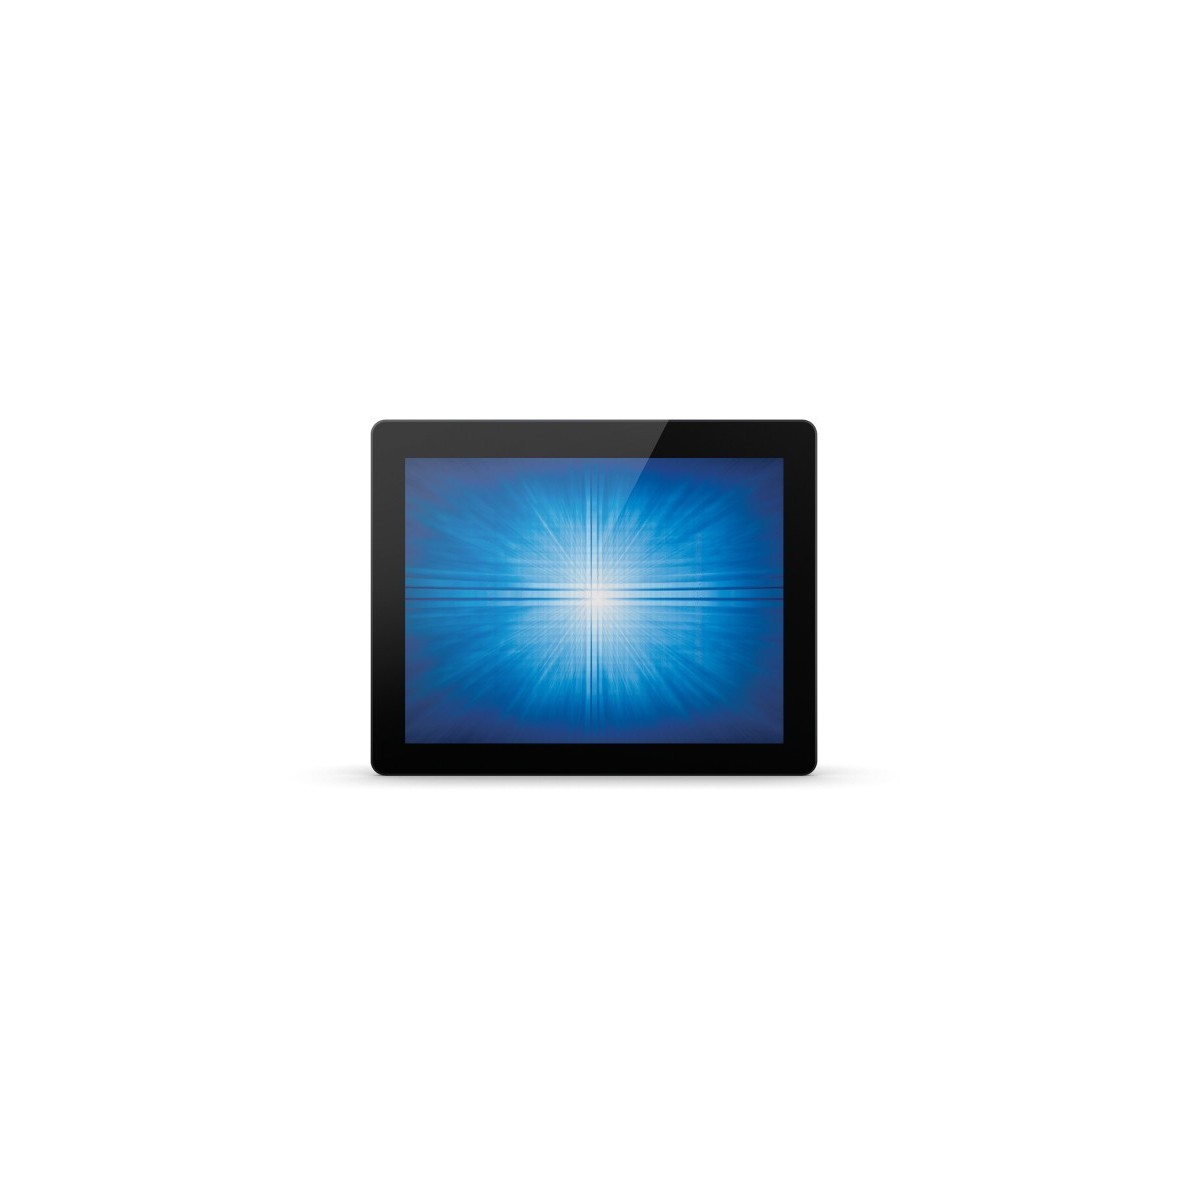 Elo Touch Solutions Elo Touch Solution 1590L - 38.1 cm (15) - 225 cd/m² - 16 ms - 700:1 - 1024 x 768 pixels - LCD